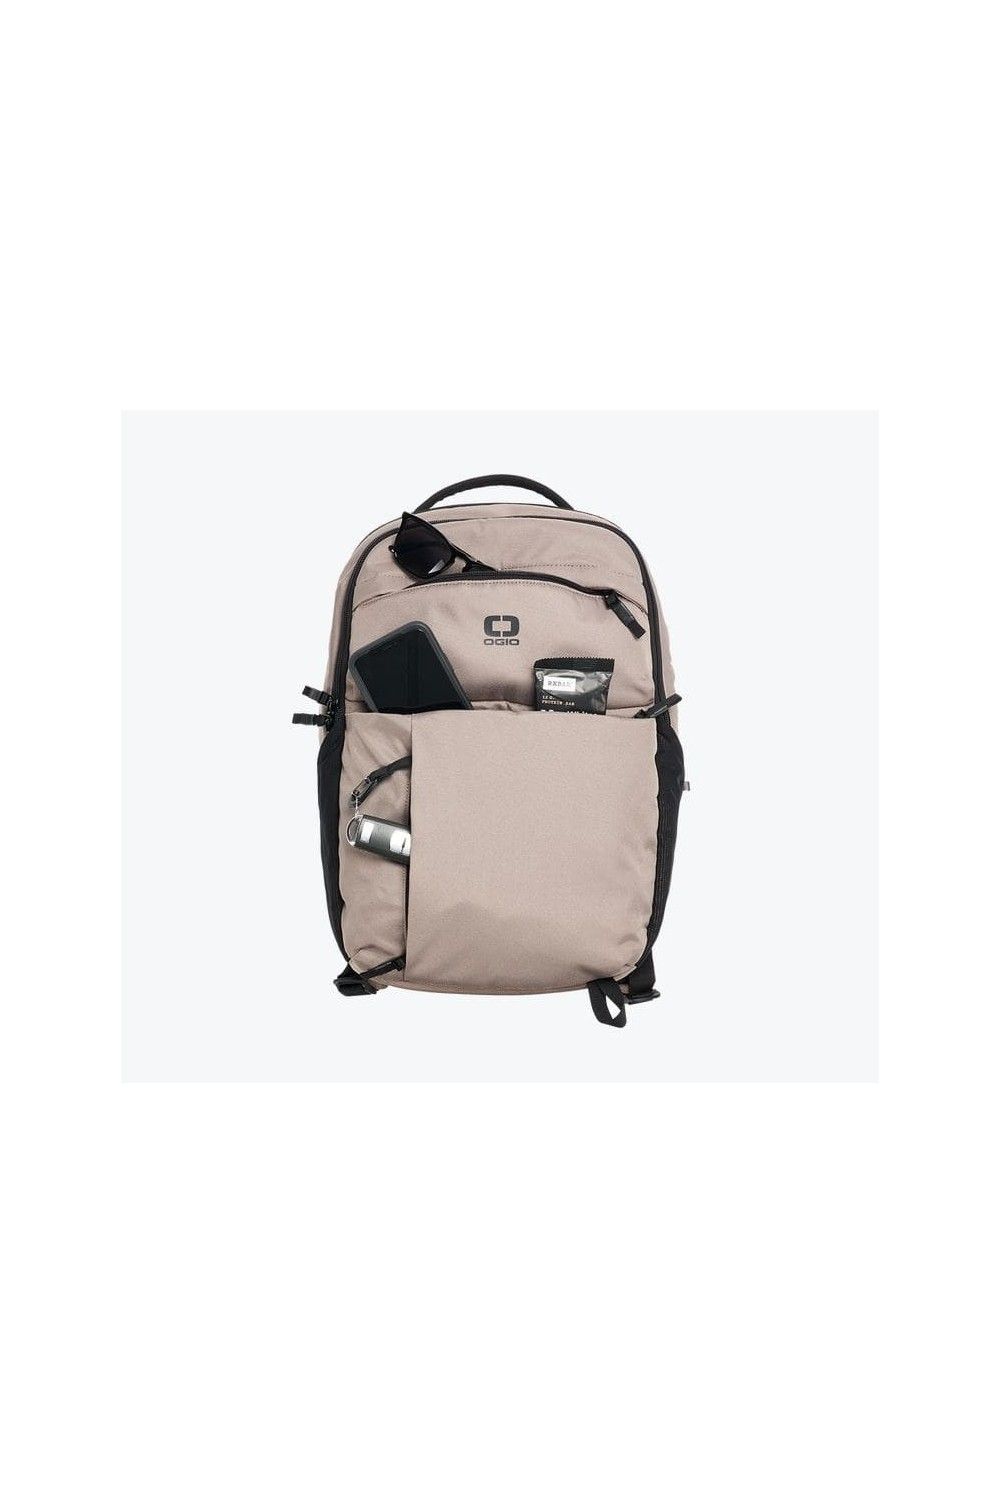 Laptop Backpack OGIO Pace 20 liters 17 inches